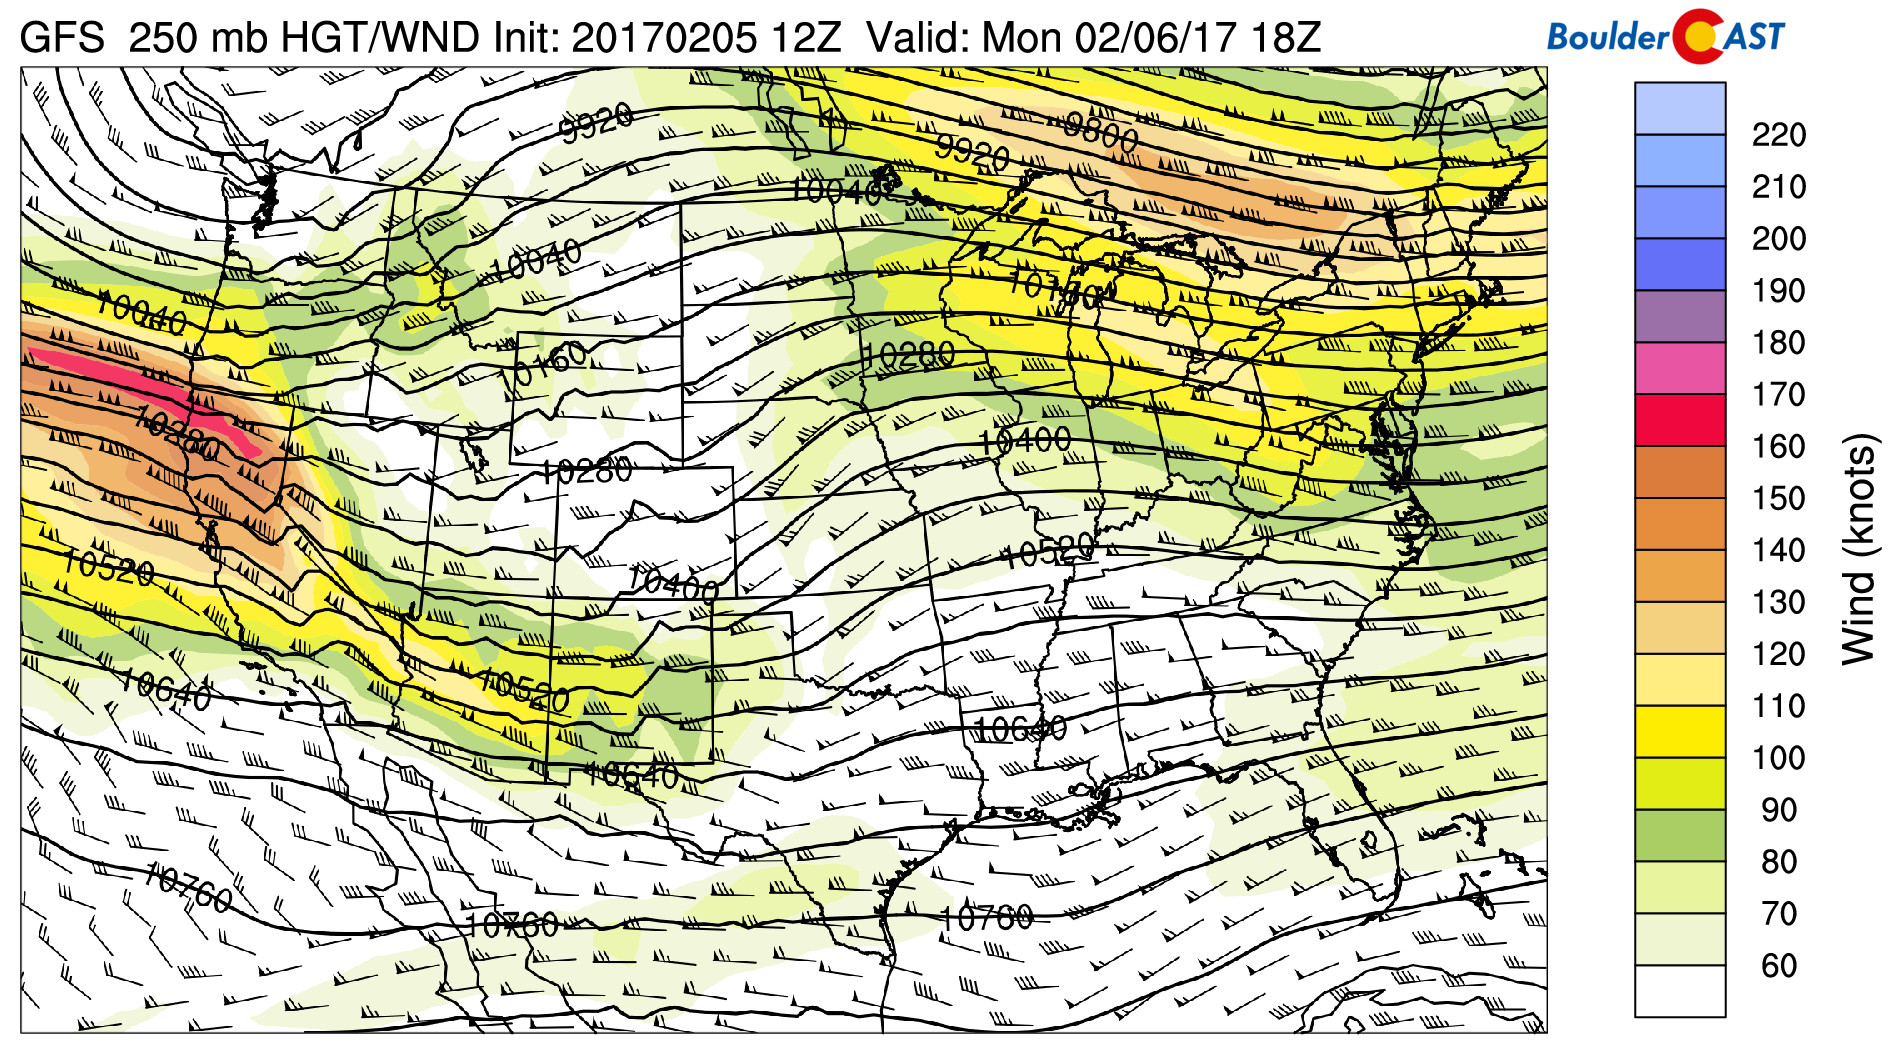 GFS 250 mb upper-level flow for this afternoon